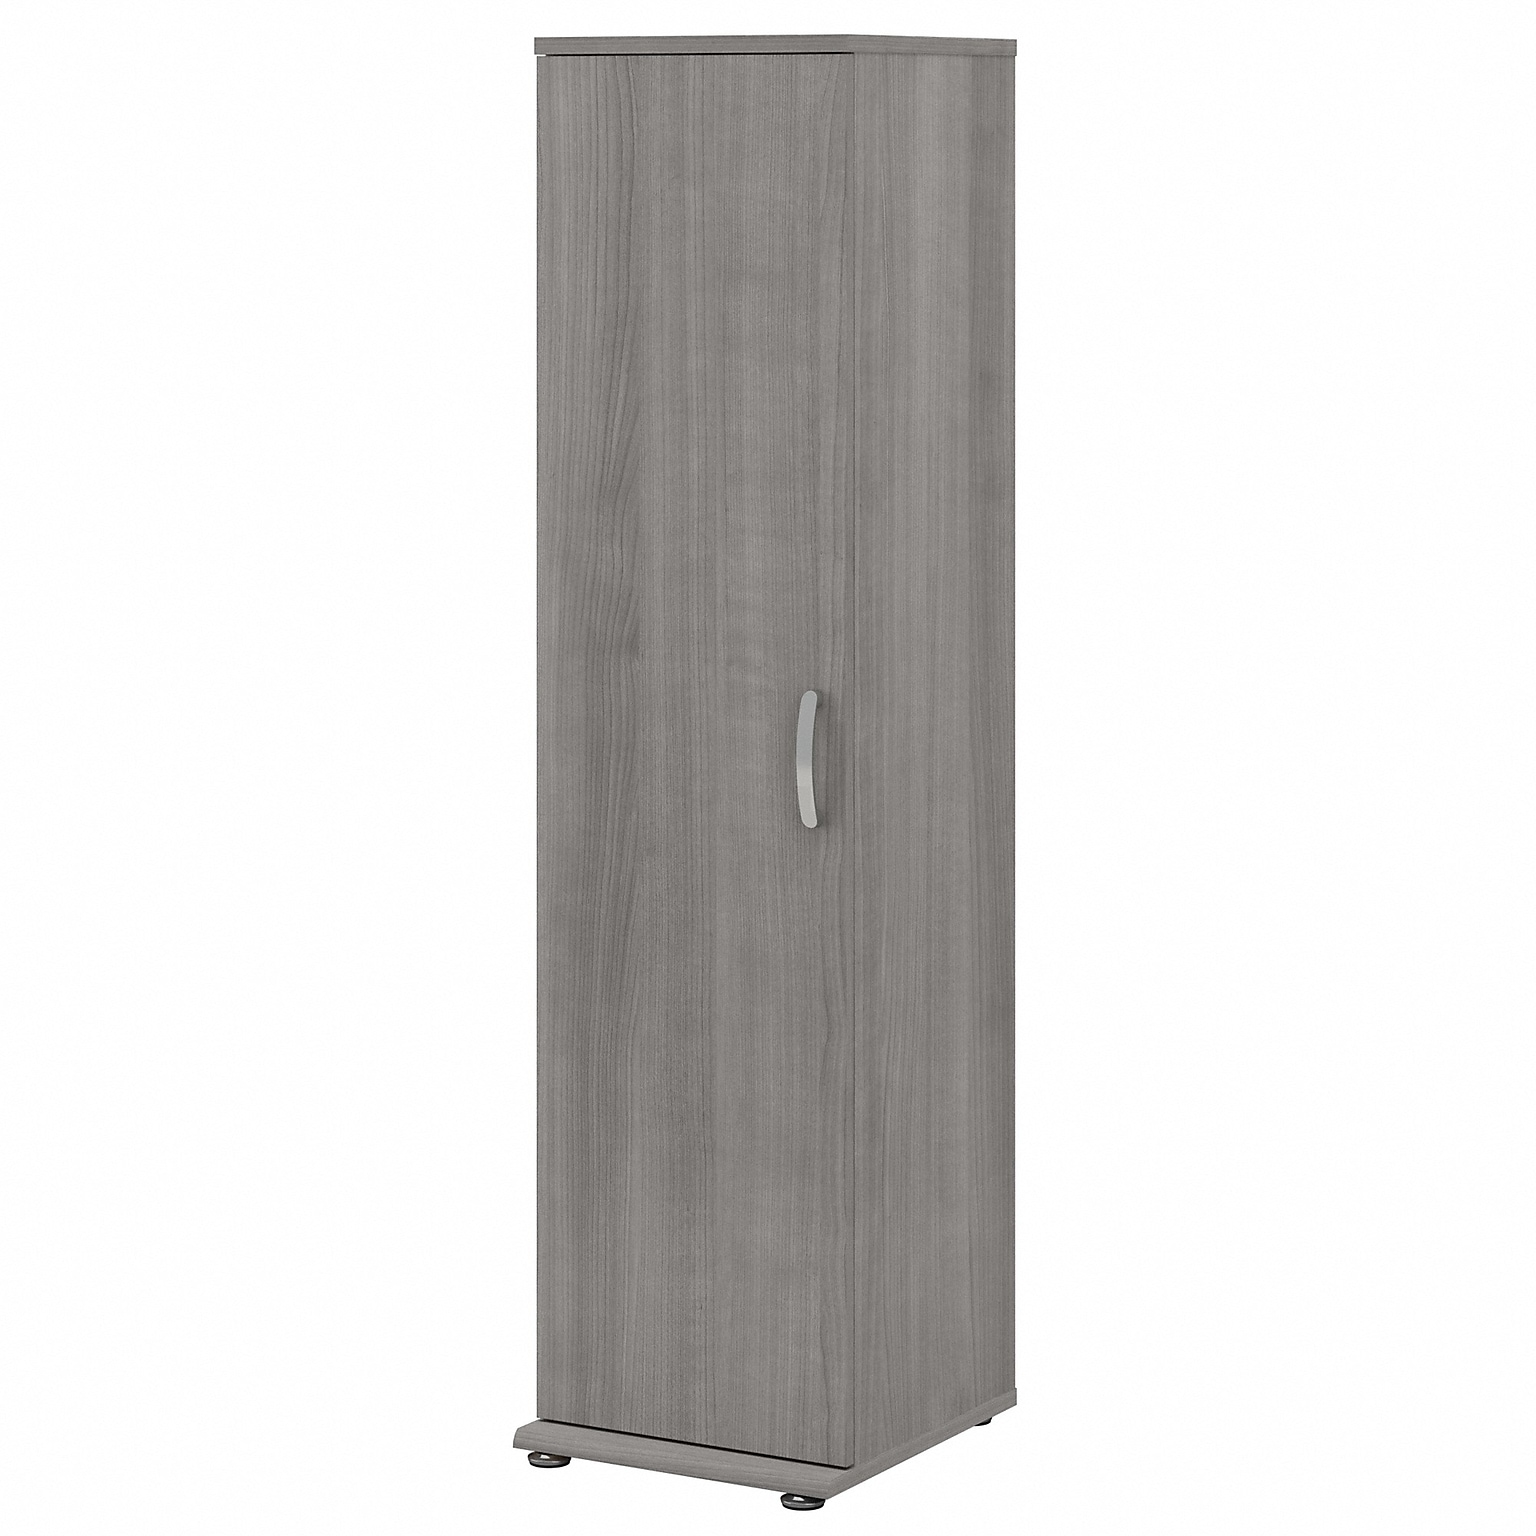 Bush Business Furniture Universal 62 Tall Narrow Storage Cabinet with Door and 3 Shelves, Platinum Gray (UNS116PG)